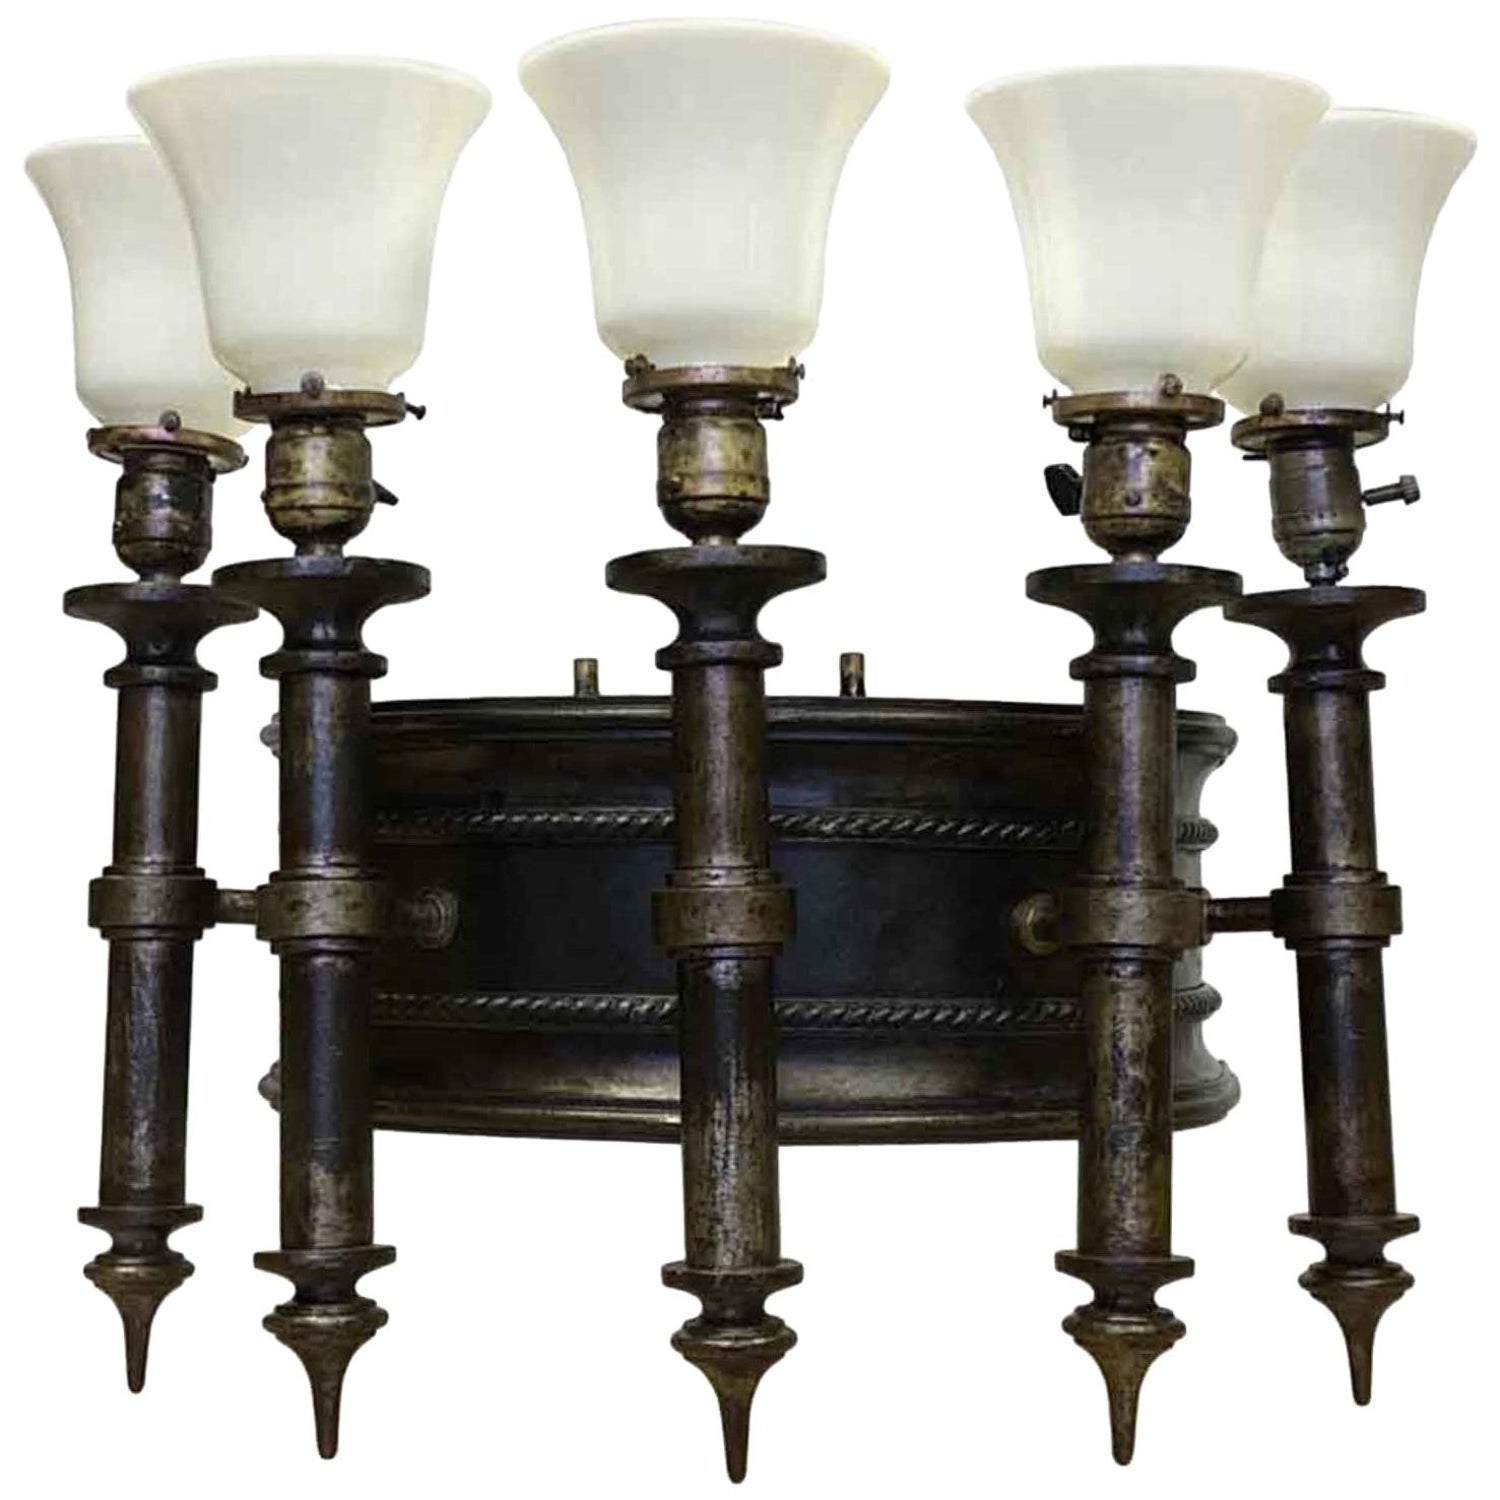 A Pair of Vintage/Gothic Style Black Coated Metal Electric Wall Lights/Sconces